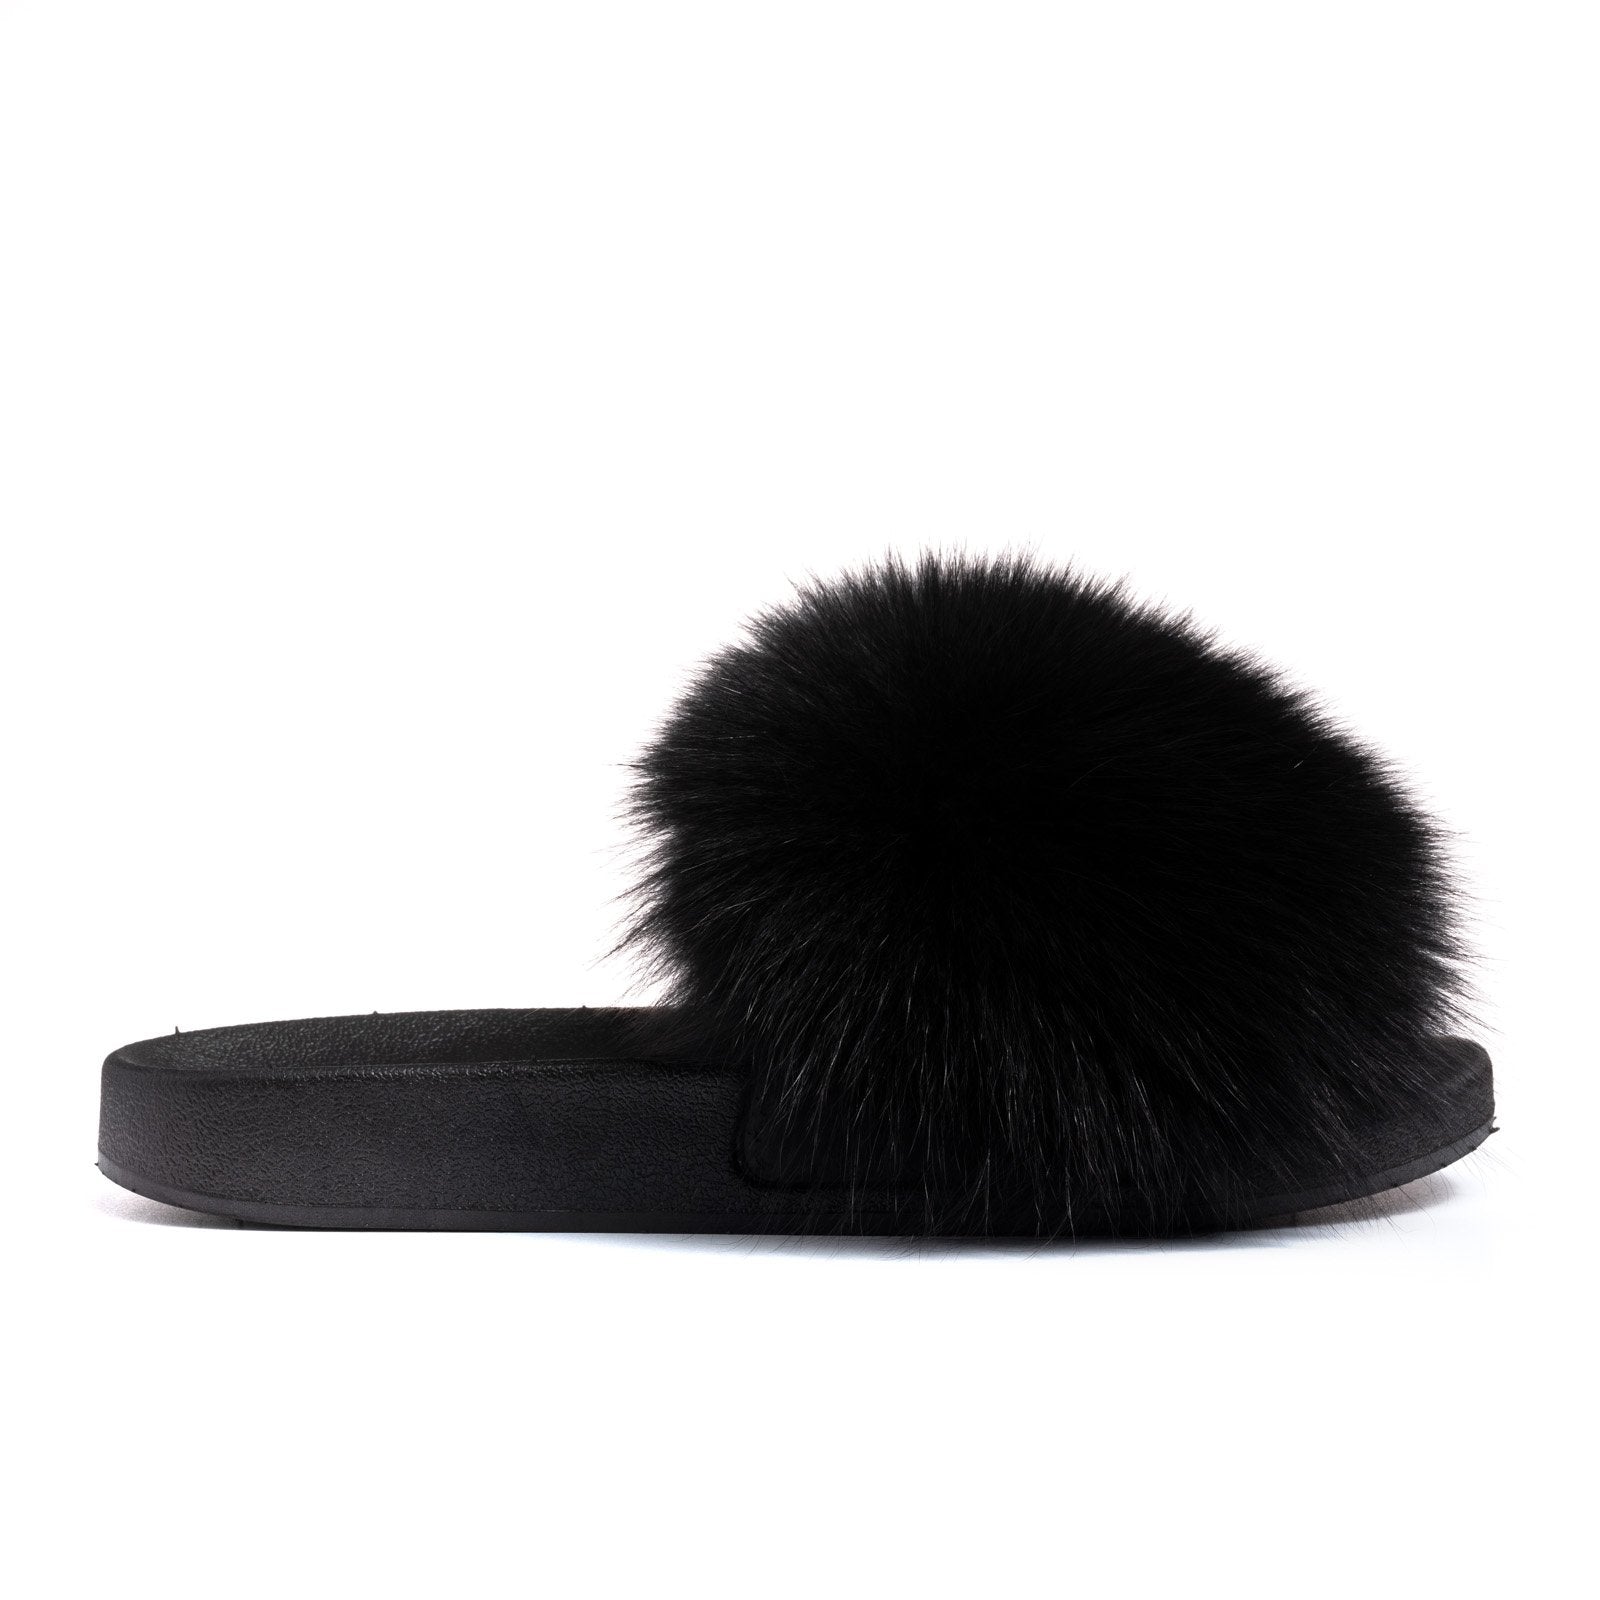 Black and White Fox Fur Slides - Made of 100% Real Fur